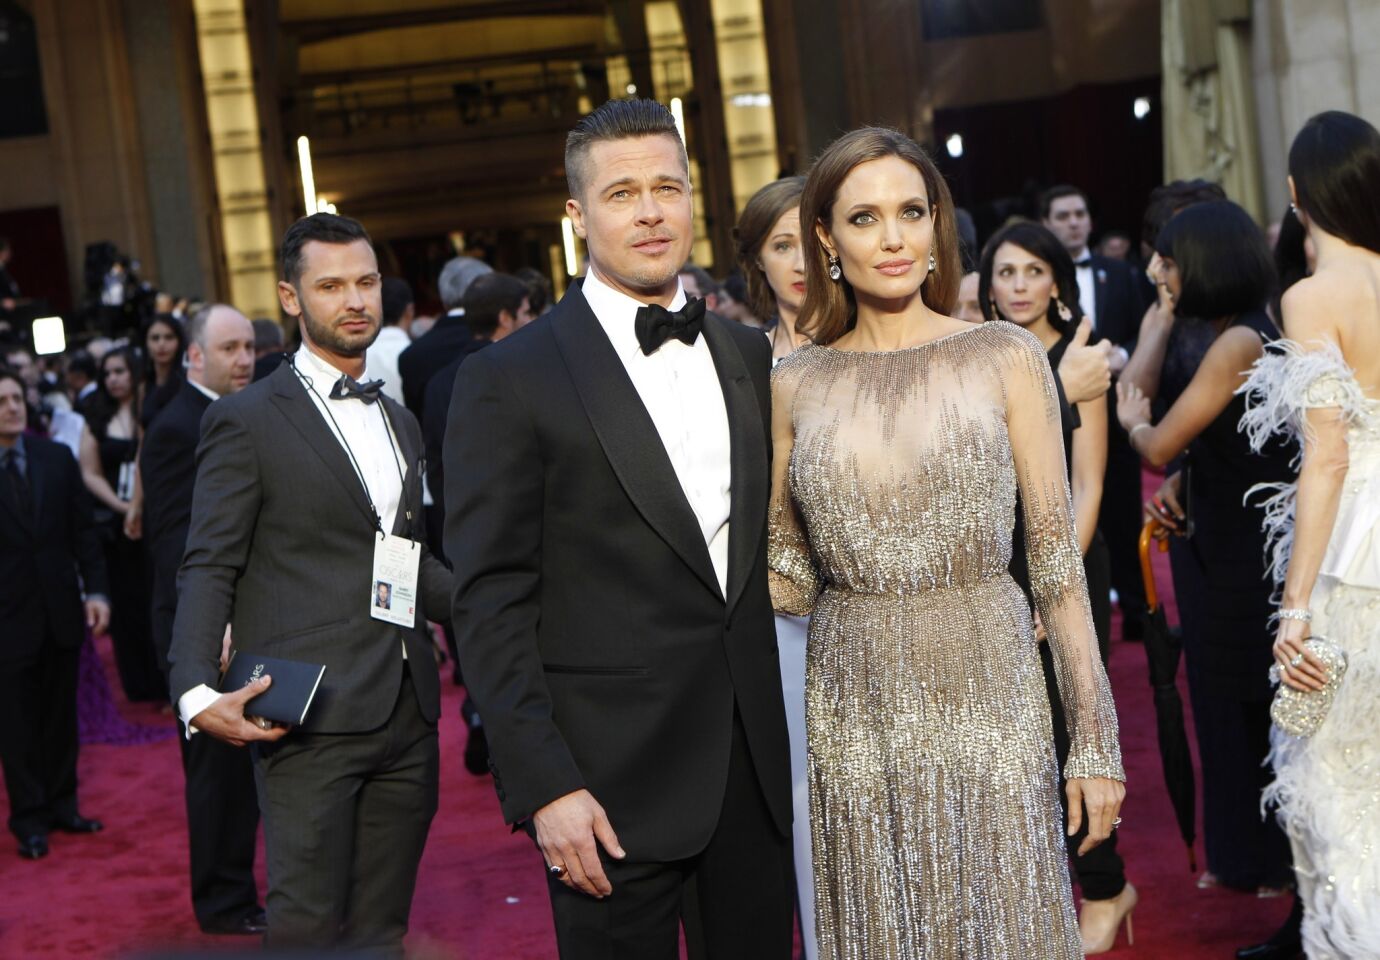 Brad Pitt and Angelina Jolie arrive at the 86th Academy Awards on March 2, 2014, at the Dolby Theatre in Hollywood.